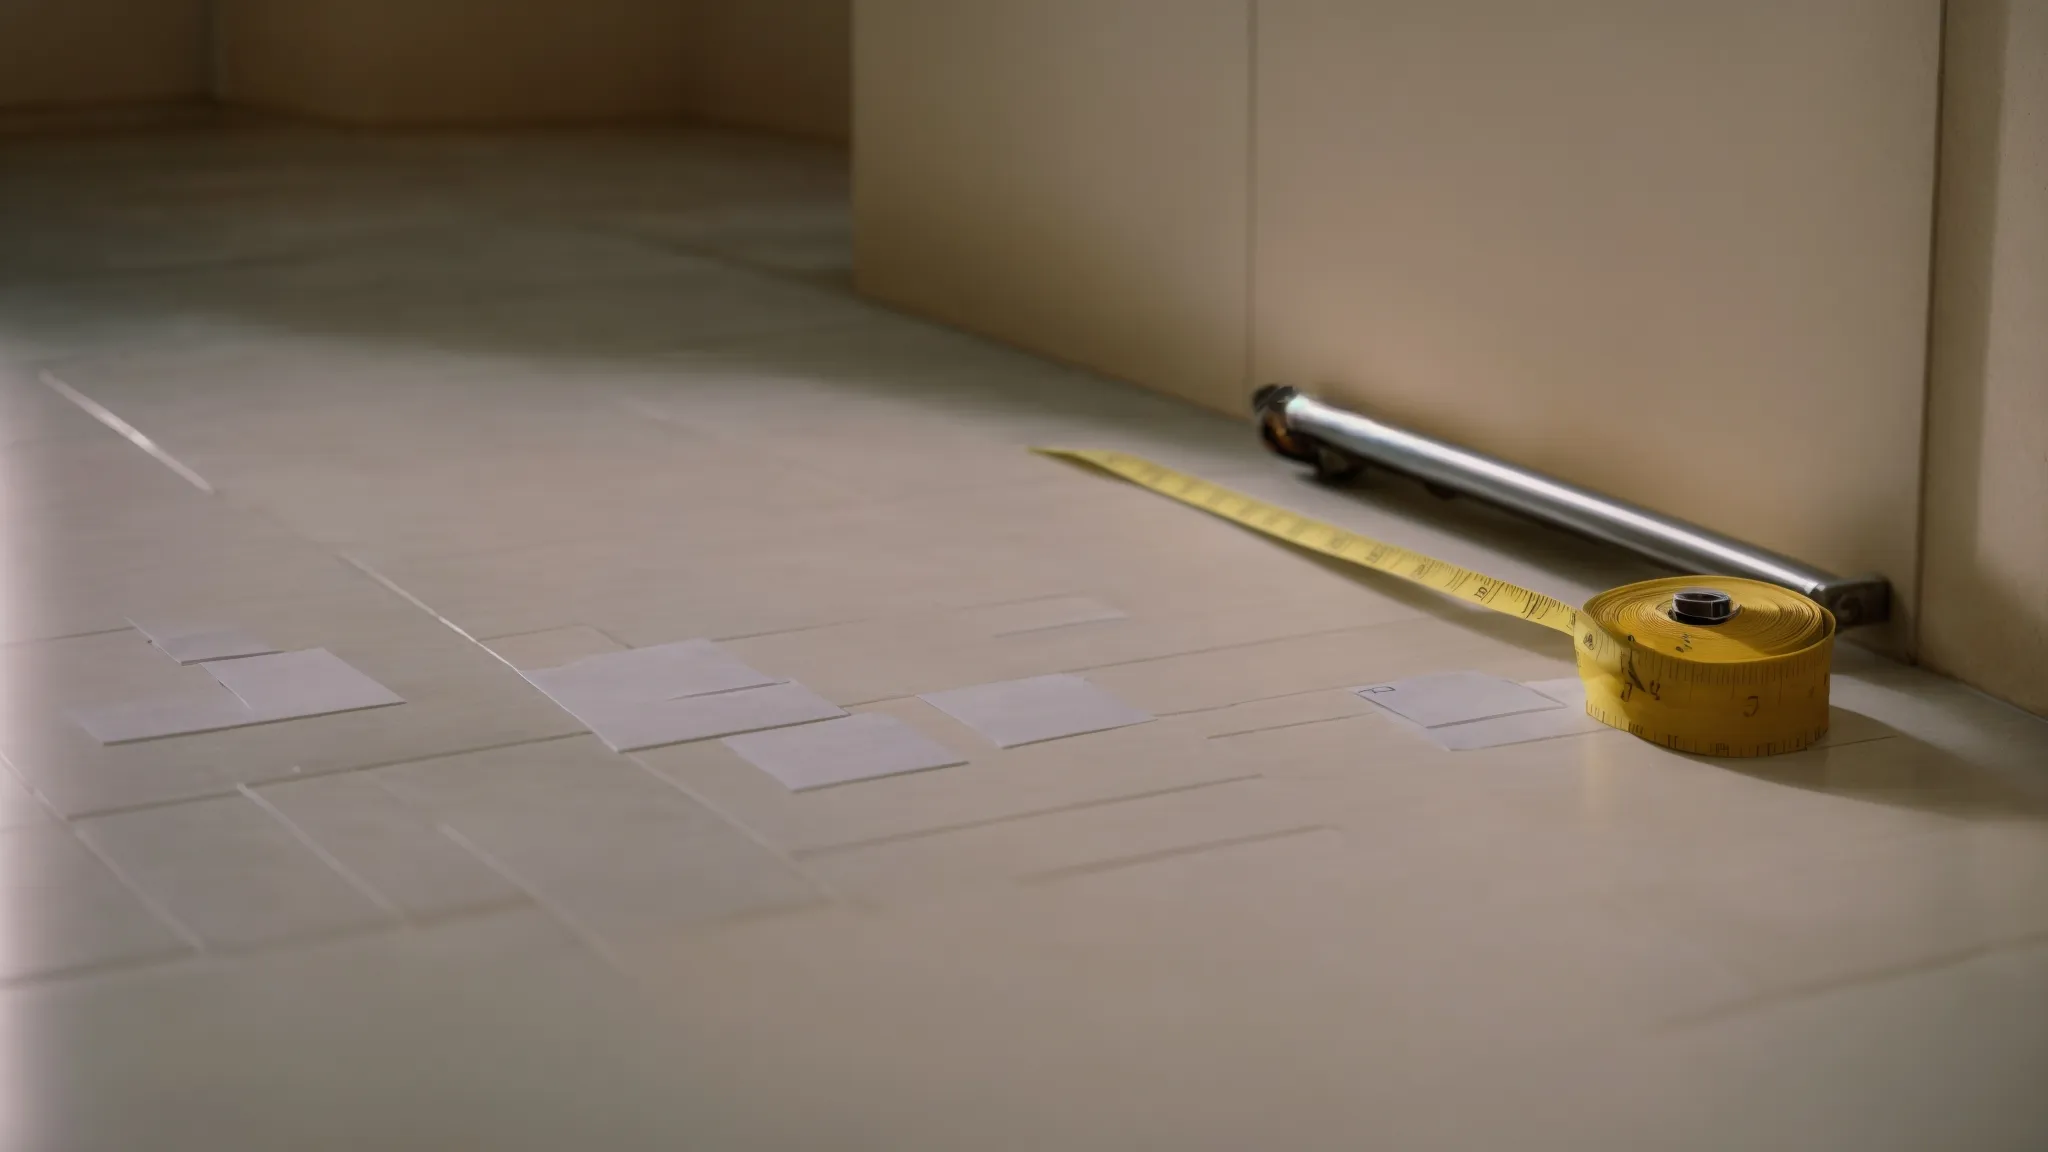 a tape measure stretches across the empty floor of a sunlit bathroom, with a notepad and pencil nearby on a bare counter.